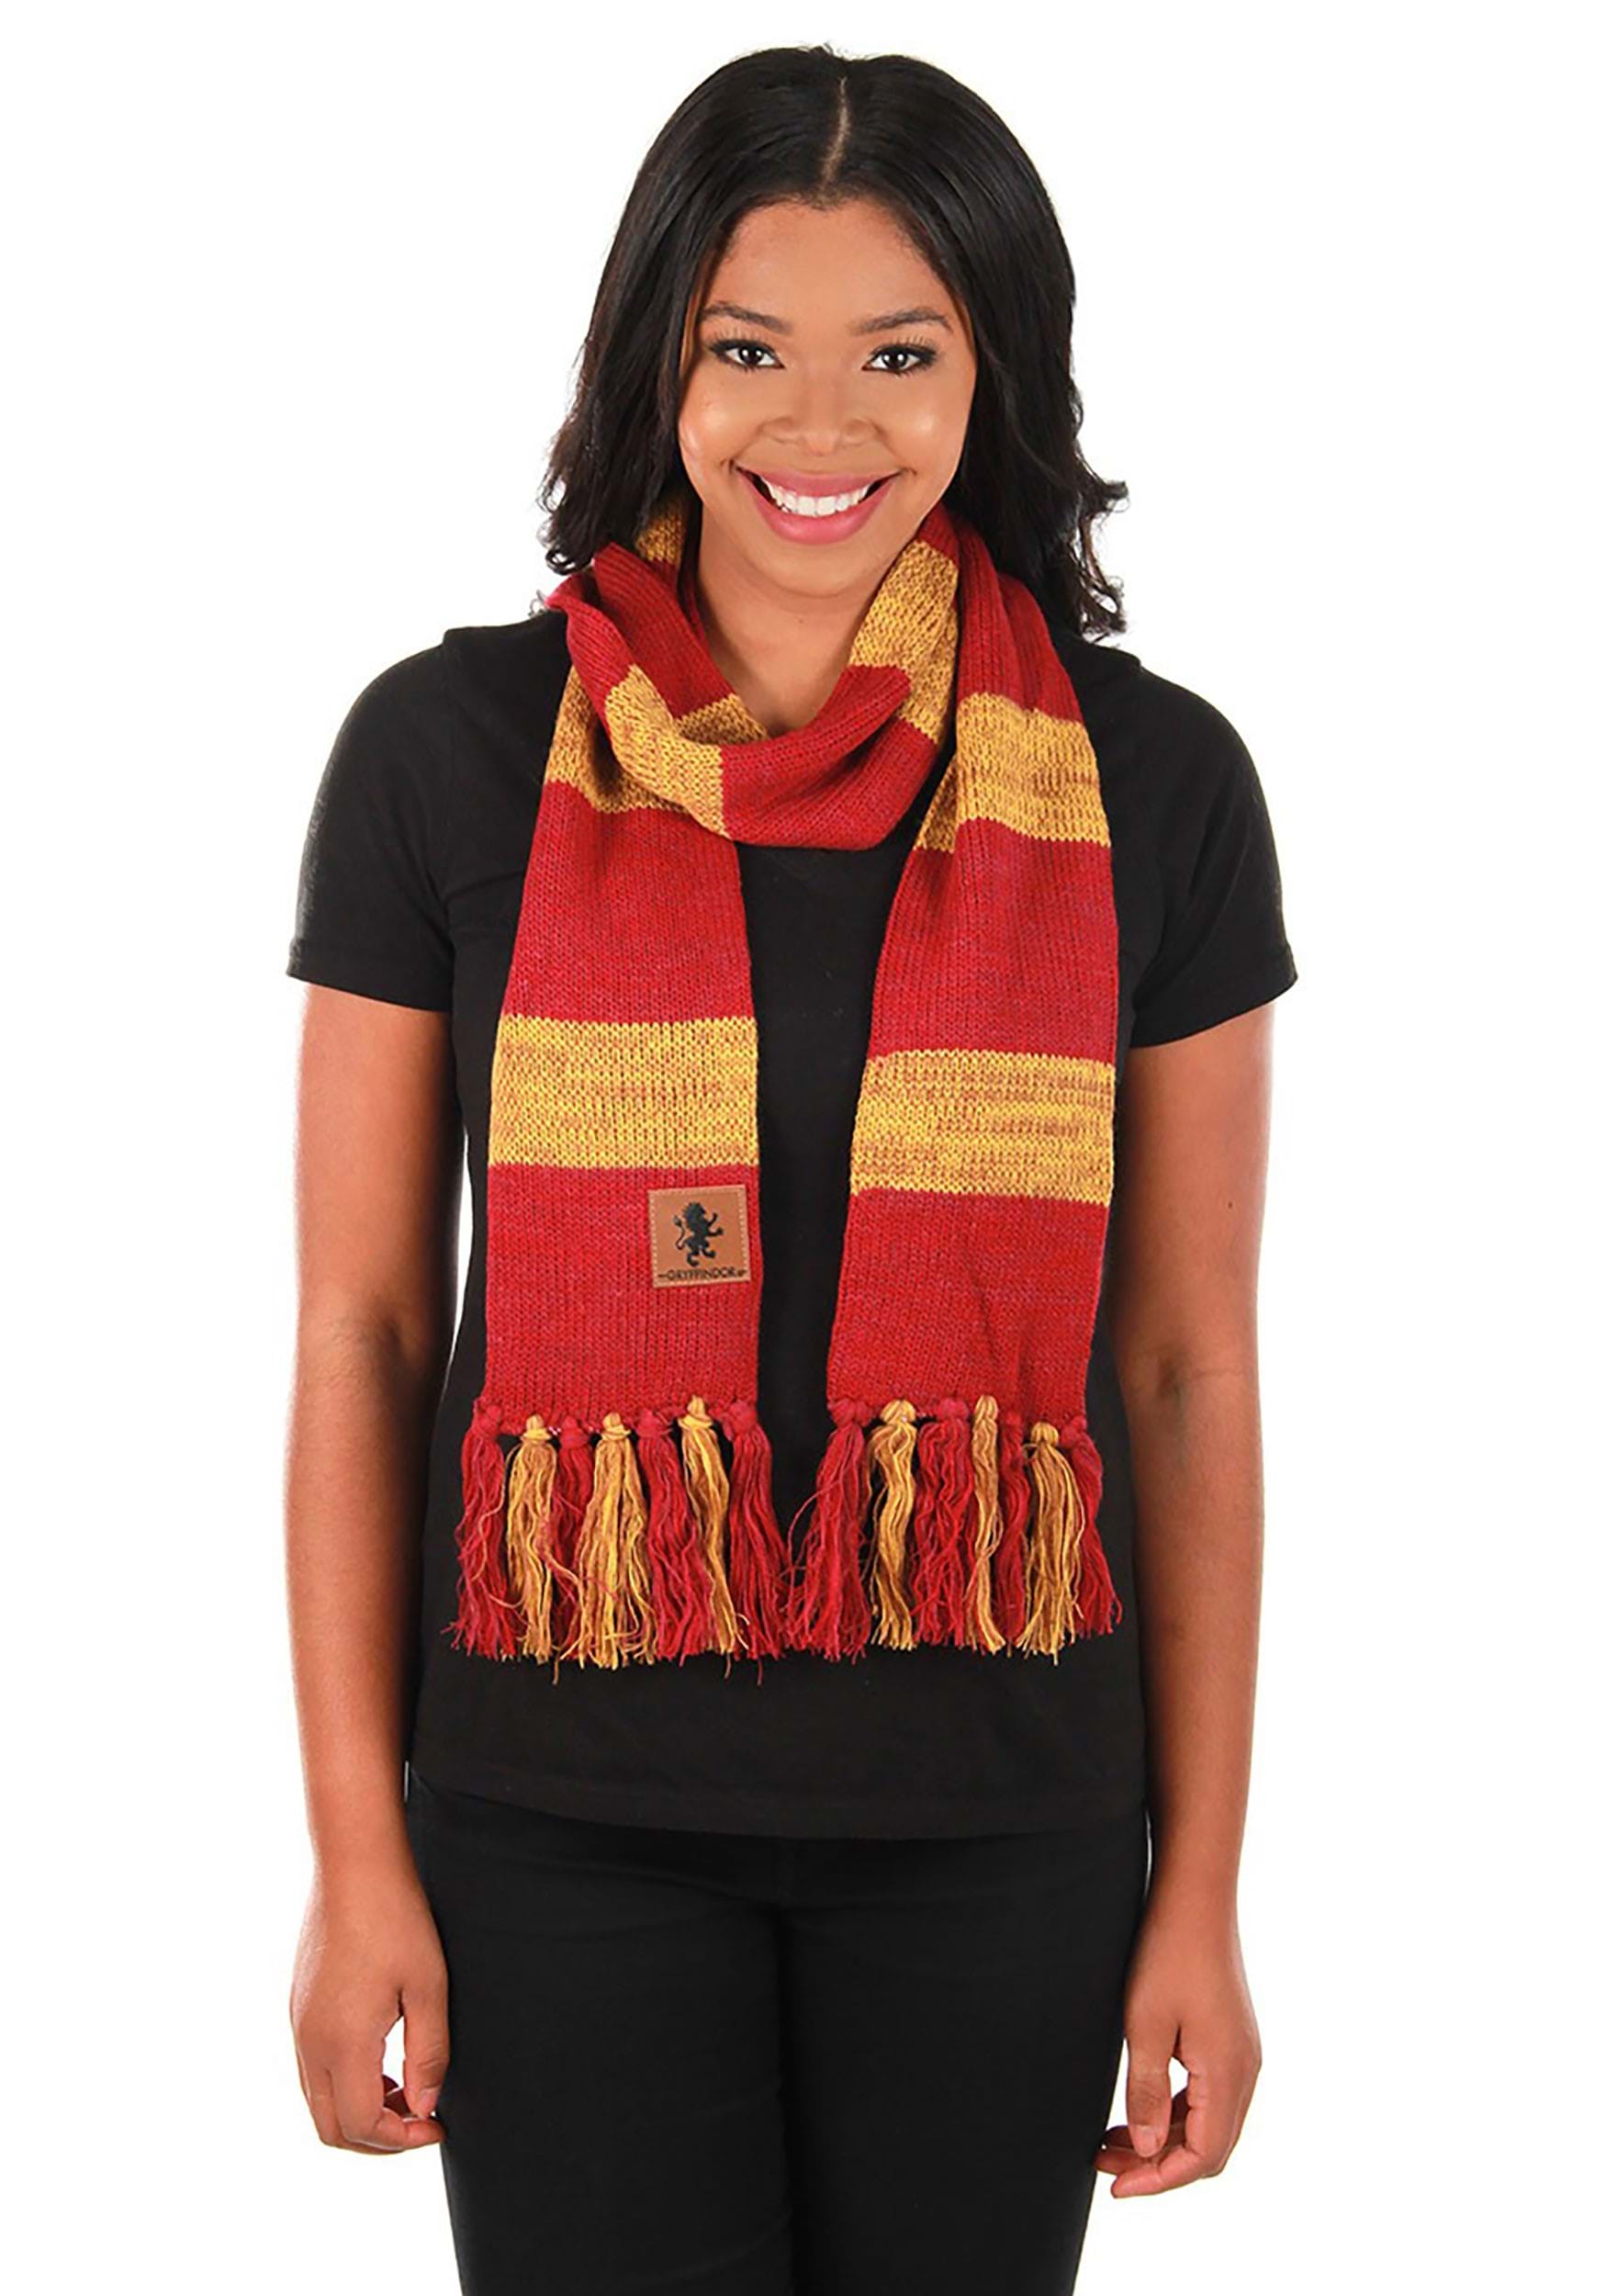 Harry Potter Gryffindor House Knit Scarf Cosplay Costume Wrap Warm Xmas Gift 